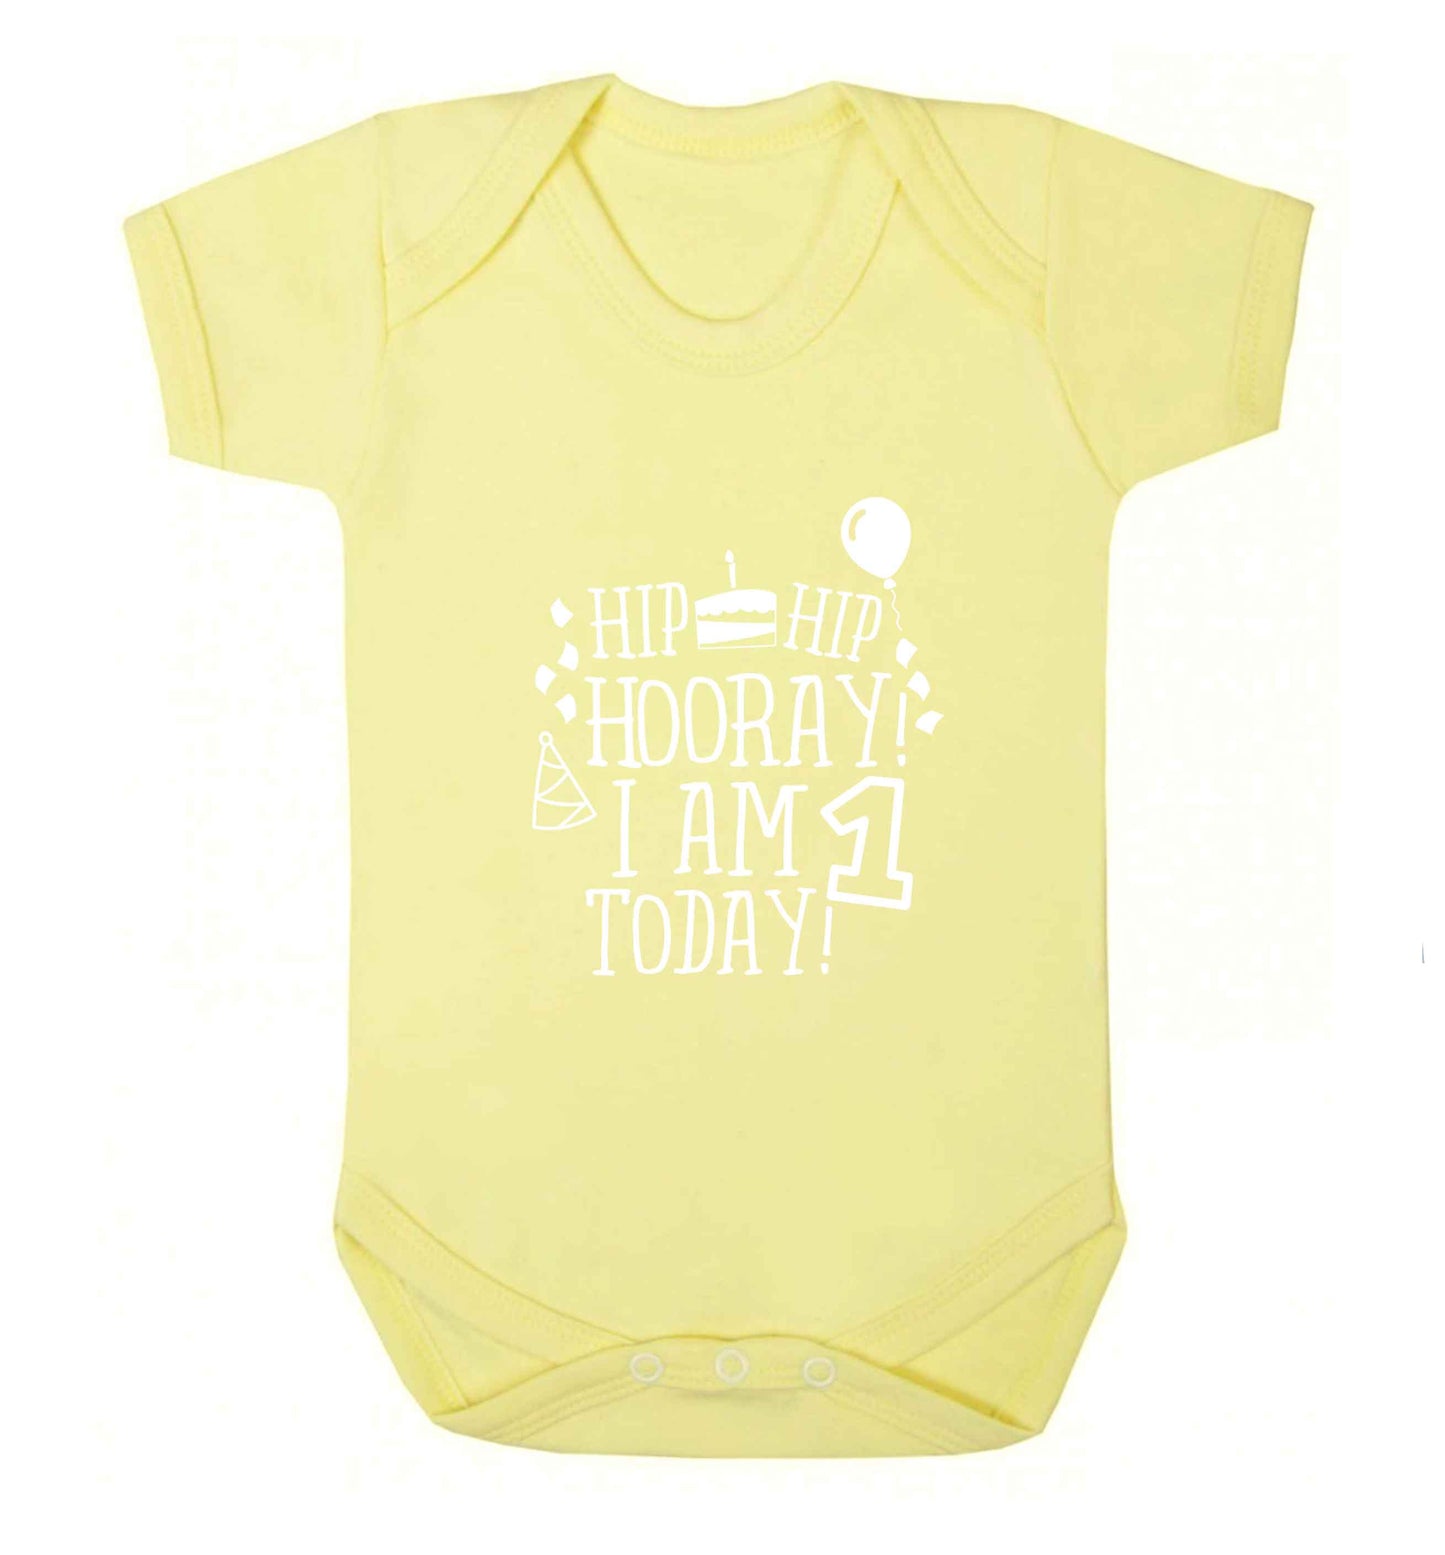 I am One Today baby vest pale yellow 18-24 months